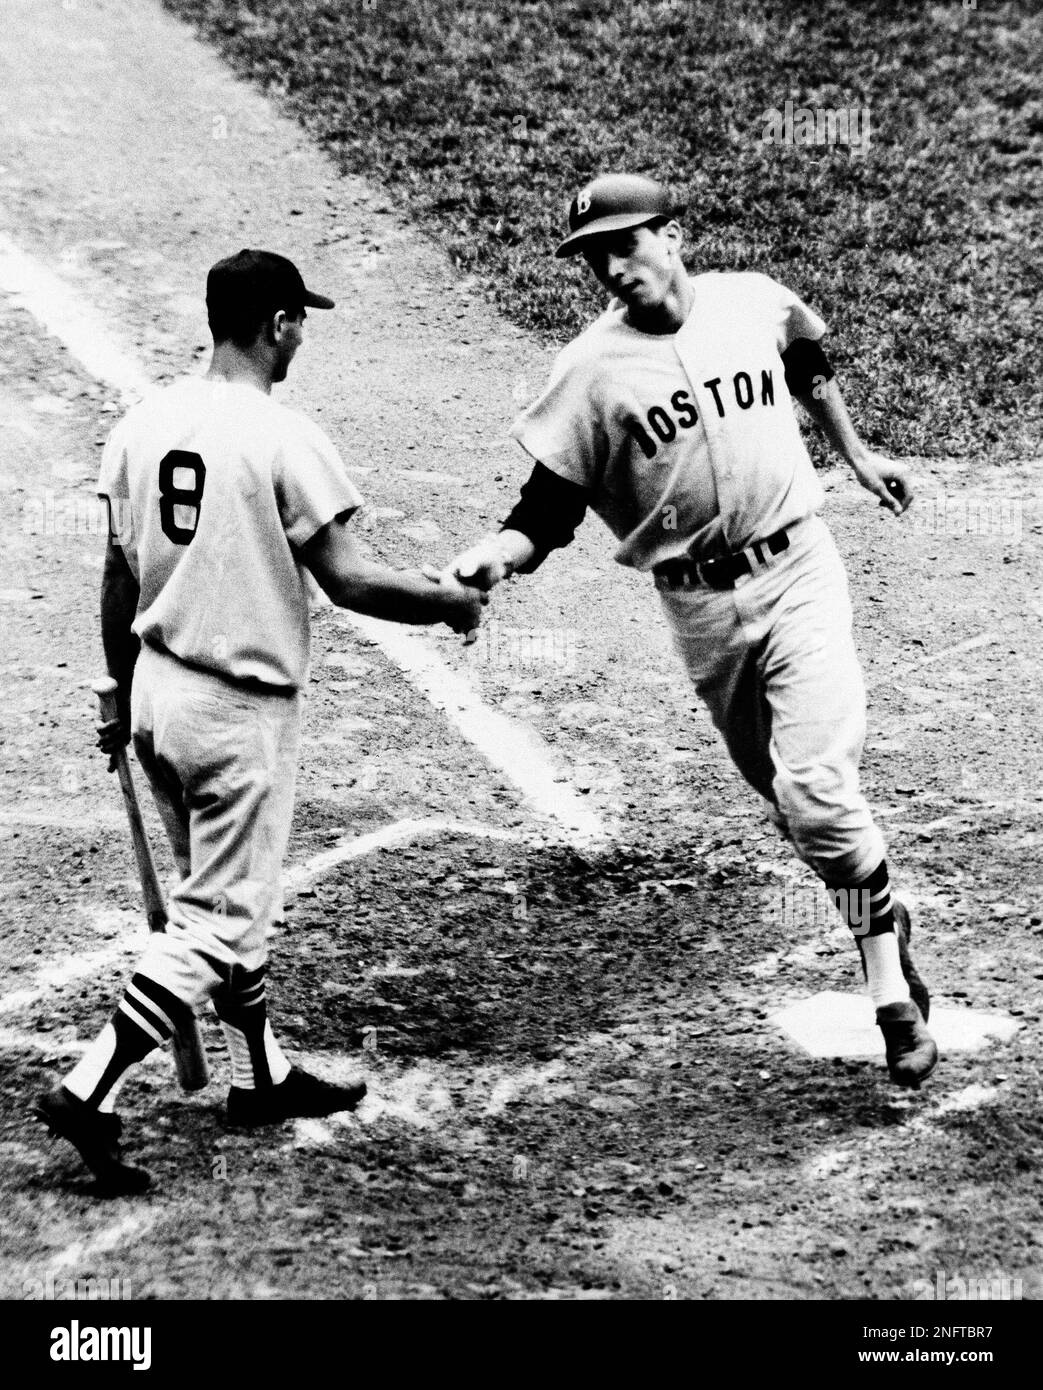 Tony Conigliaro Boston Red Sox Center fielder is greeted at home plate by  teammate Russ Nixon after hitting a tremendous home run over the left field  wall, screen and adjoining street his